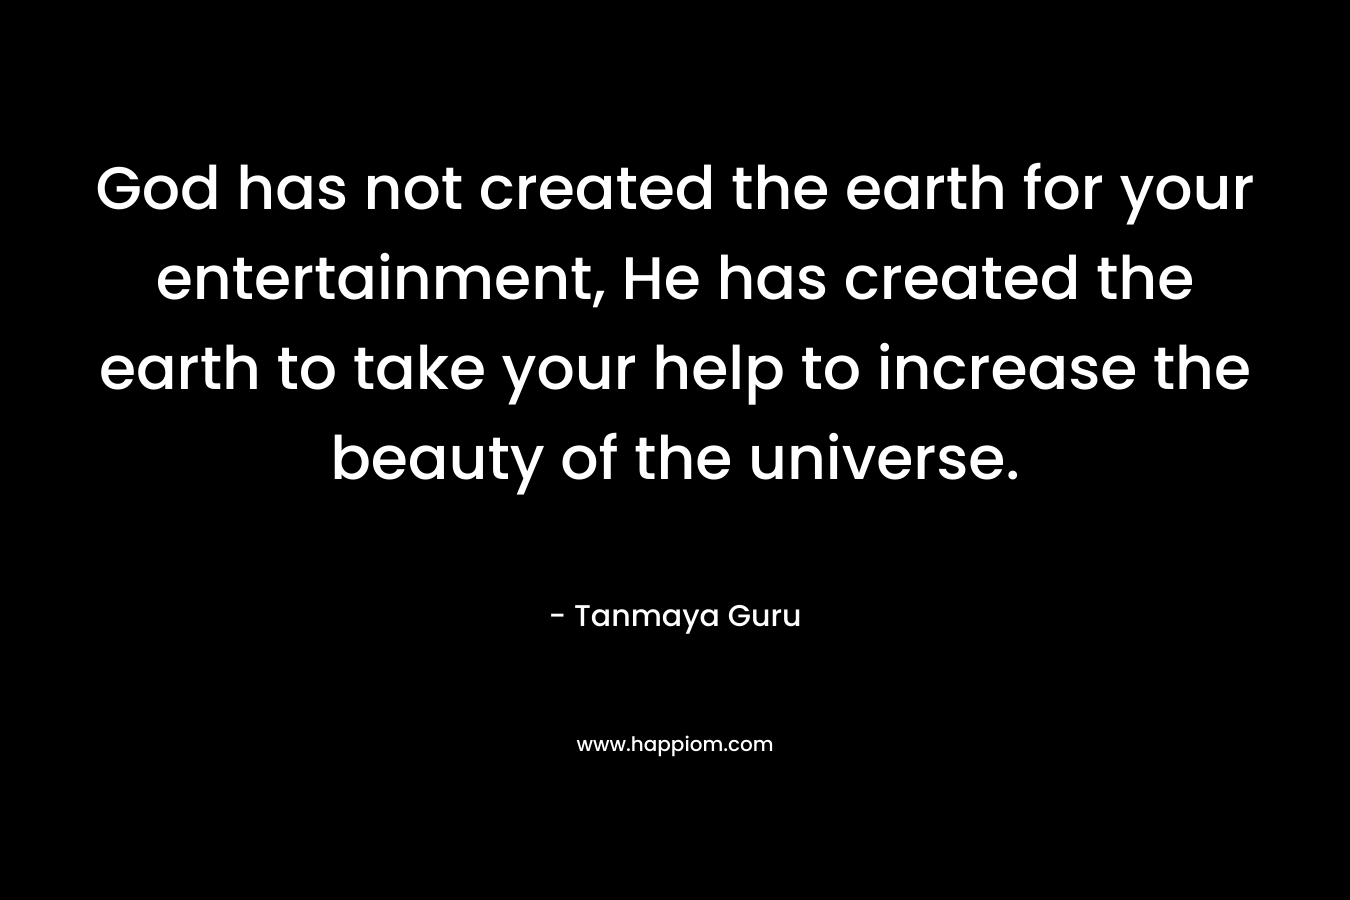 God has not created the earth for your entertainment, He has created the earth to take your help to increase the beauty of the universe.